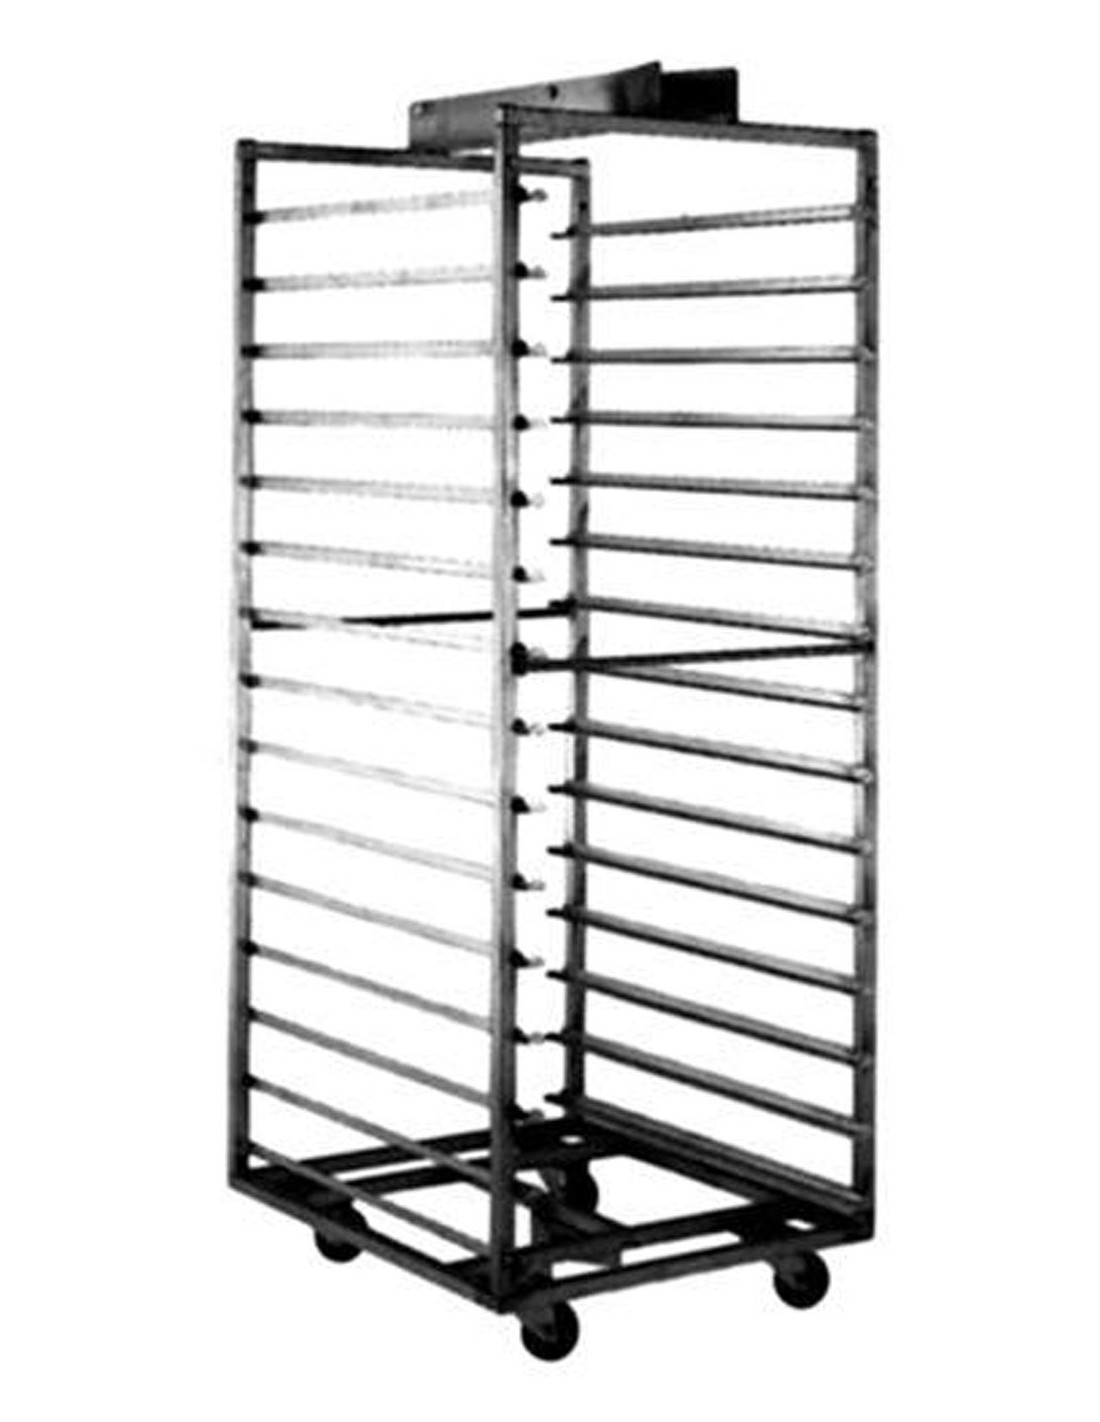 Trolley 18 stainless steel shelves for ovens Rotorbake E8/T8 cm 60 x 80 with rotating platform